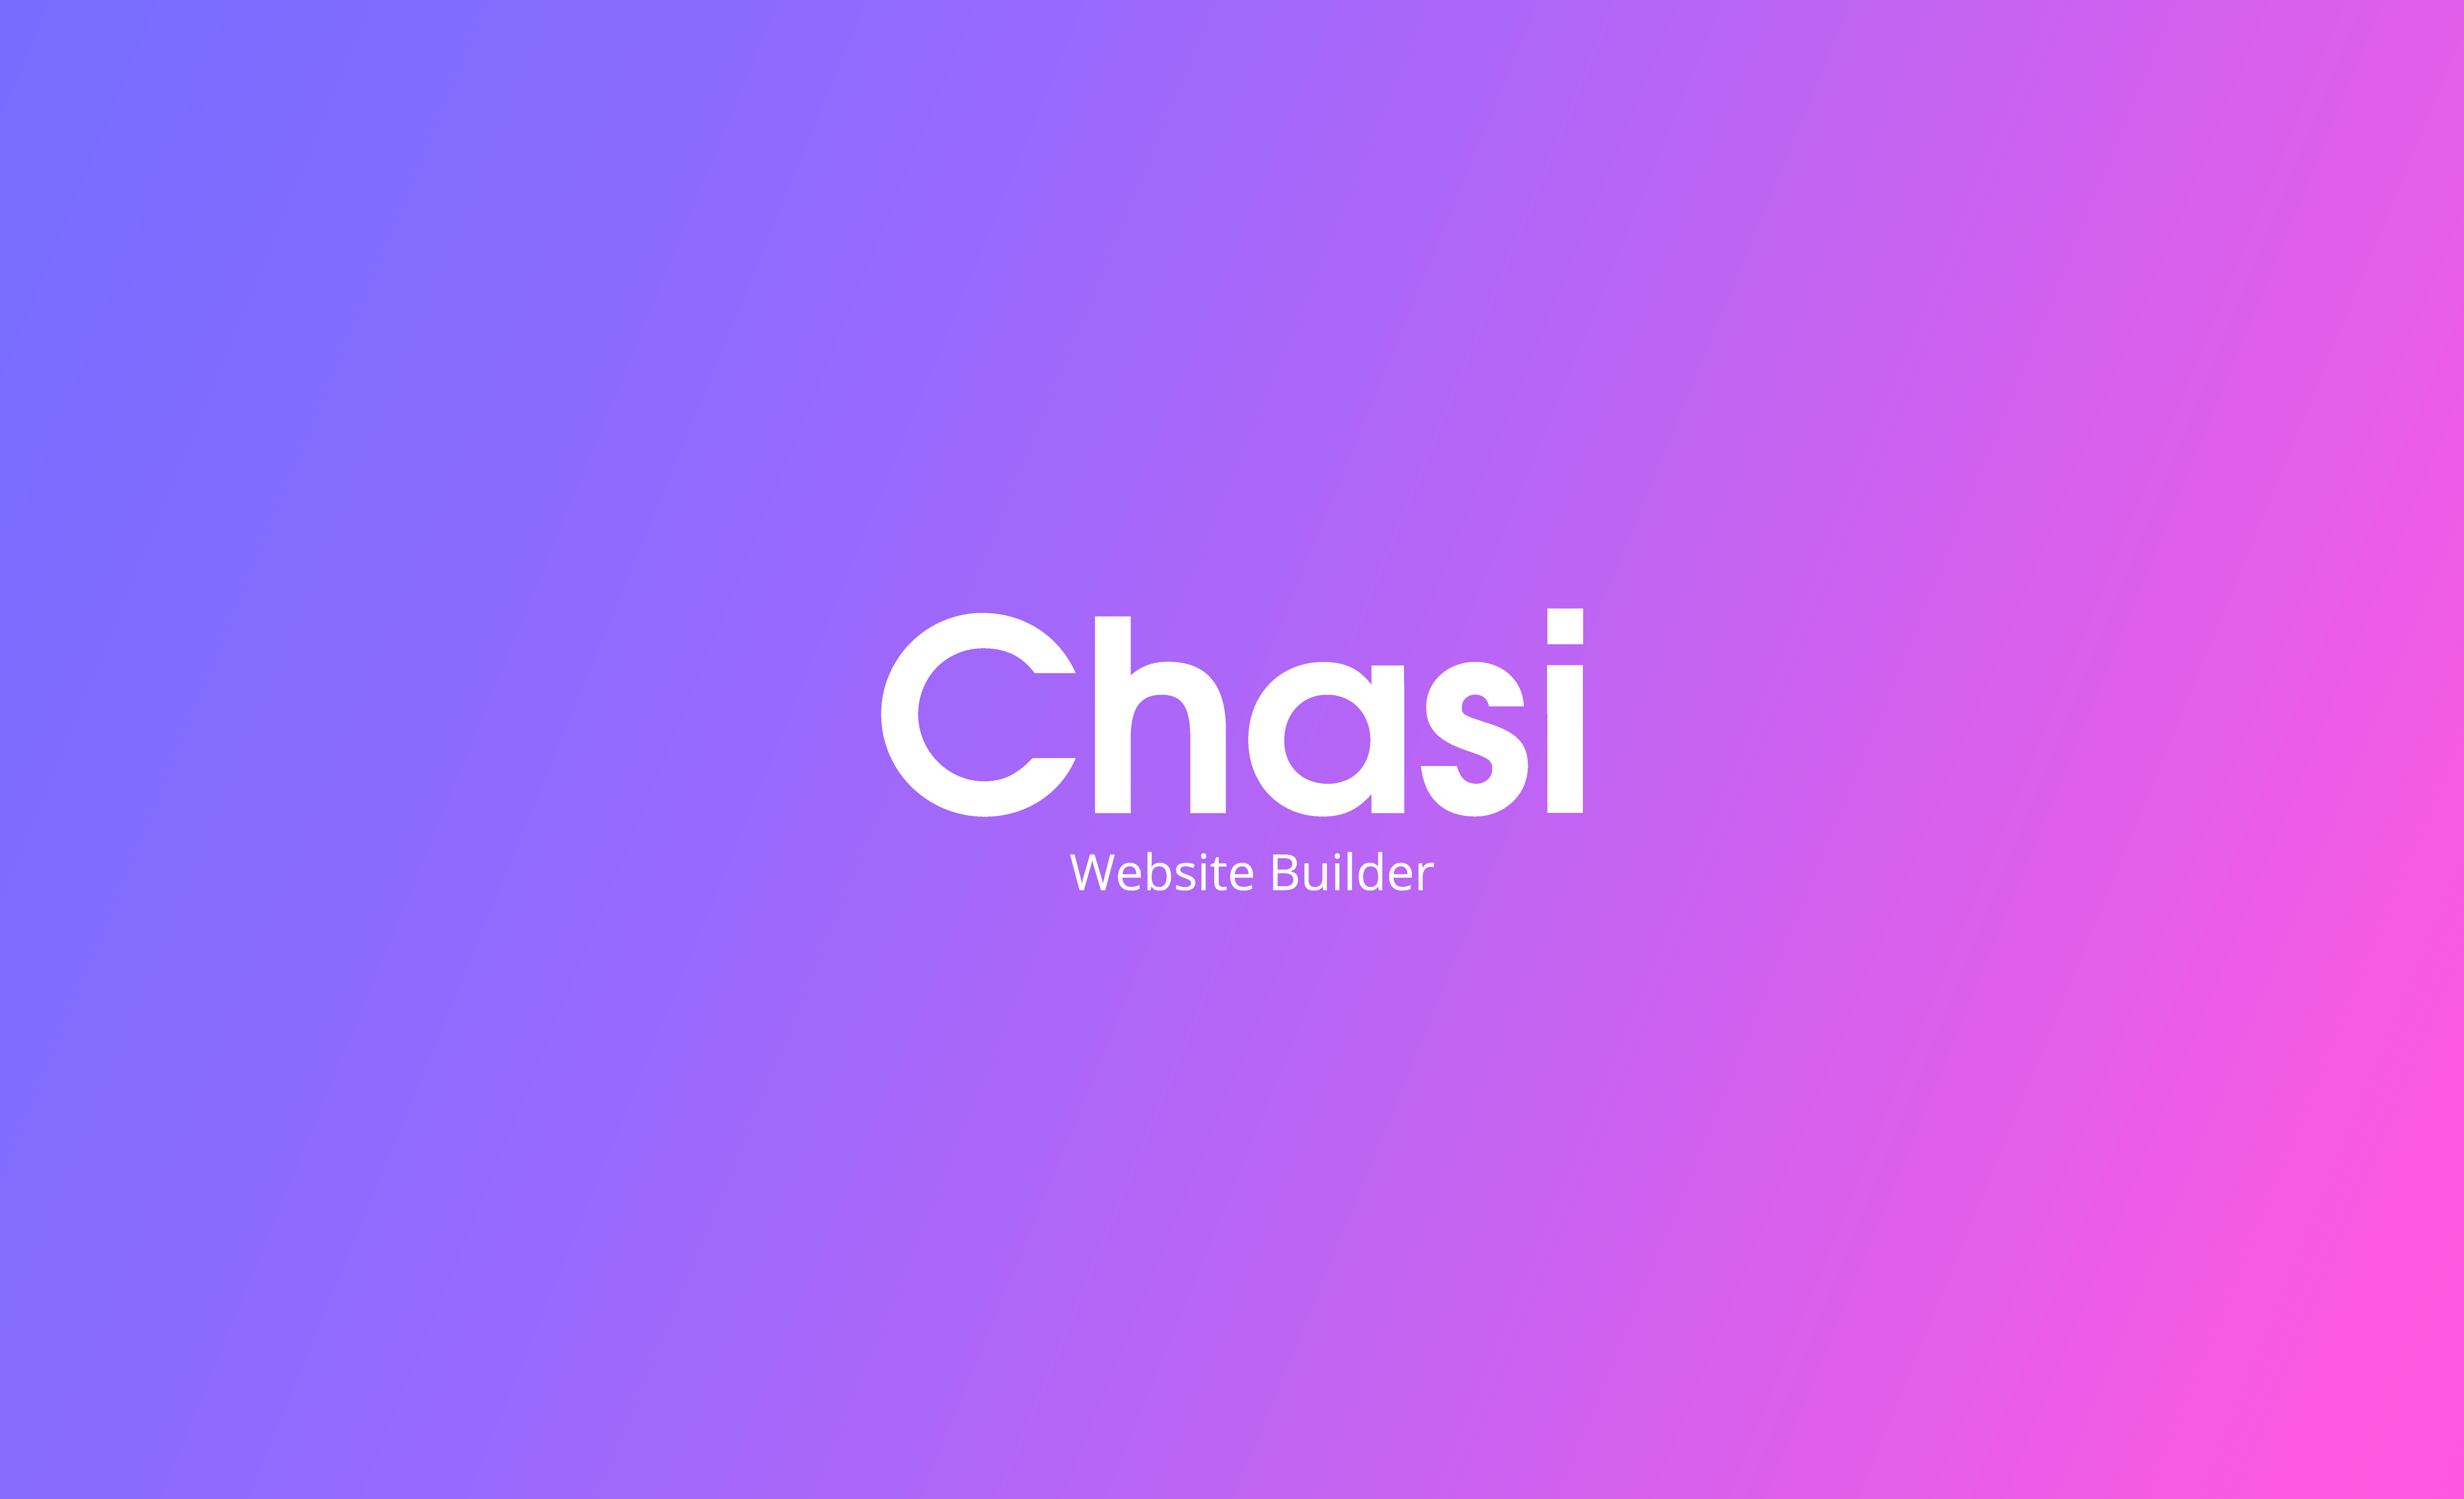 Why Chasi? More than just a website builder